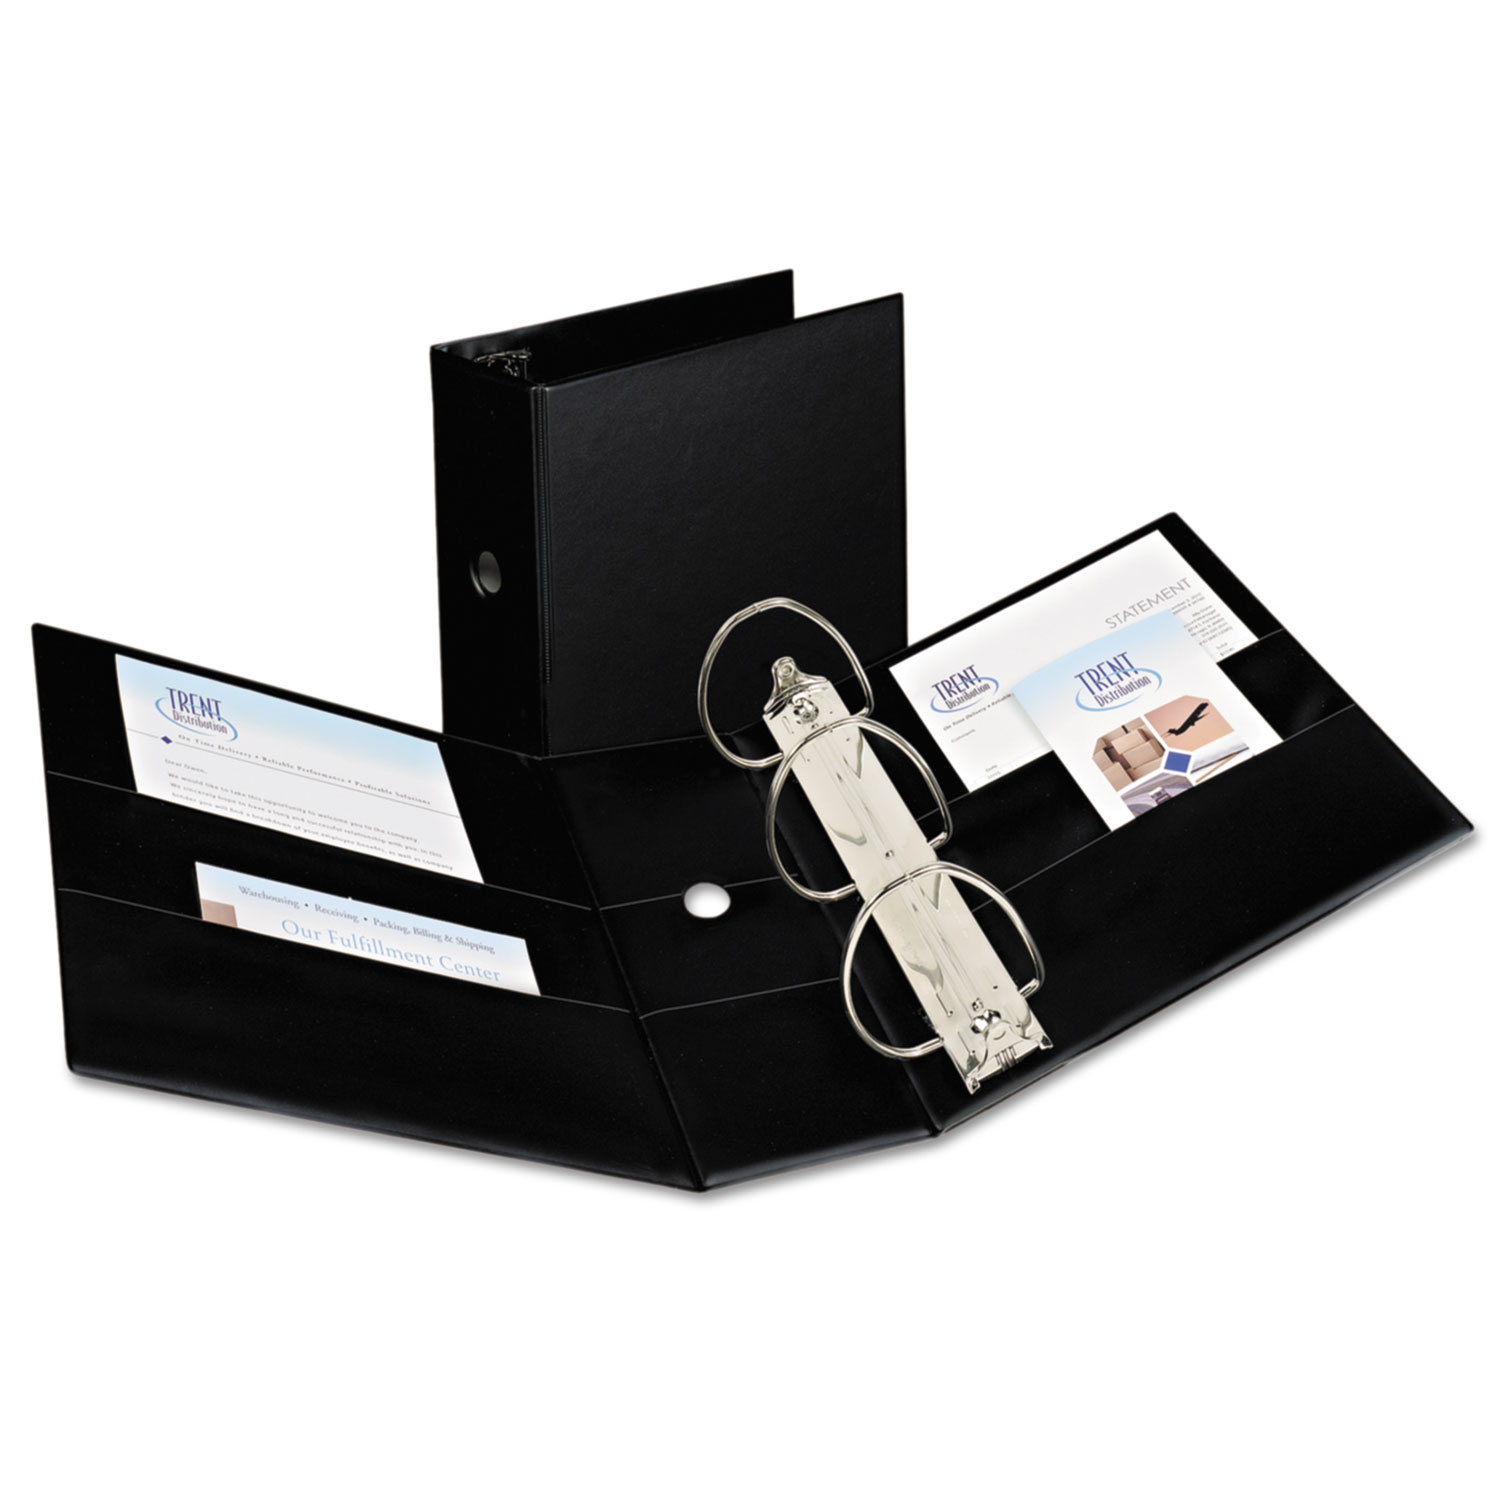  Avery 07901 Durable Non-View Binder with DuraHinge and EZD Rings, 3 Rings, 5 Capacity, 11 x 8.5, Black (AVE07901) 